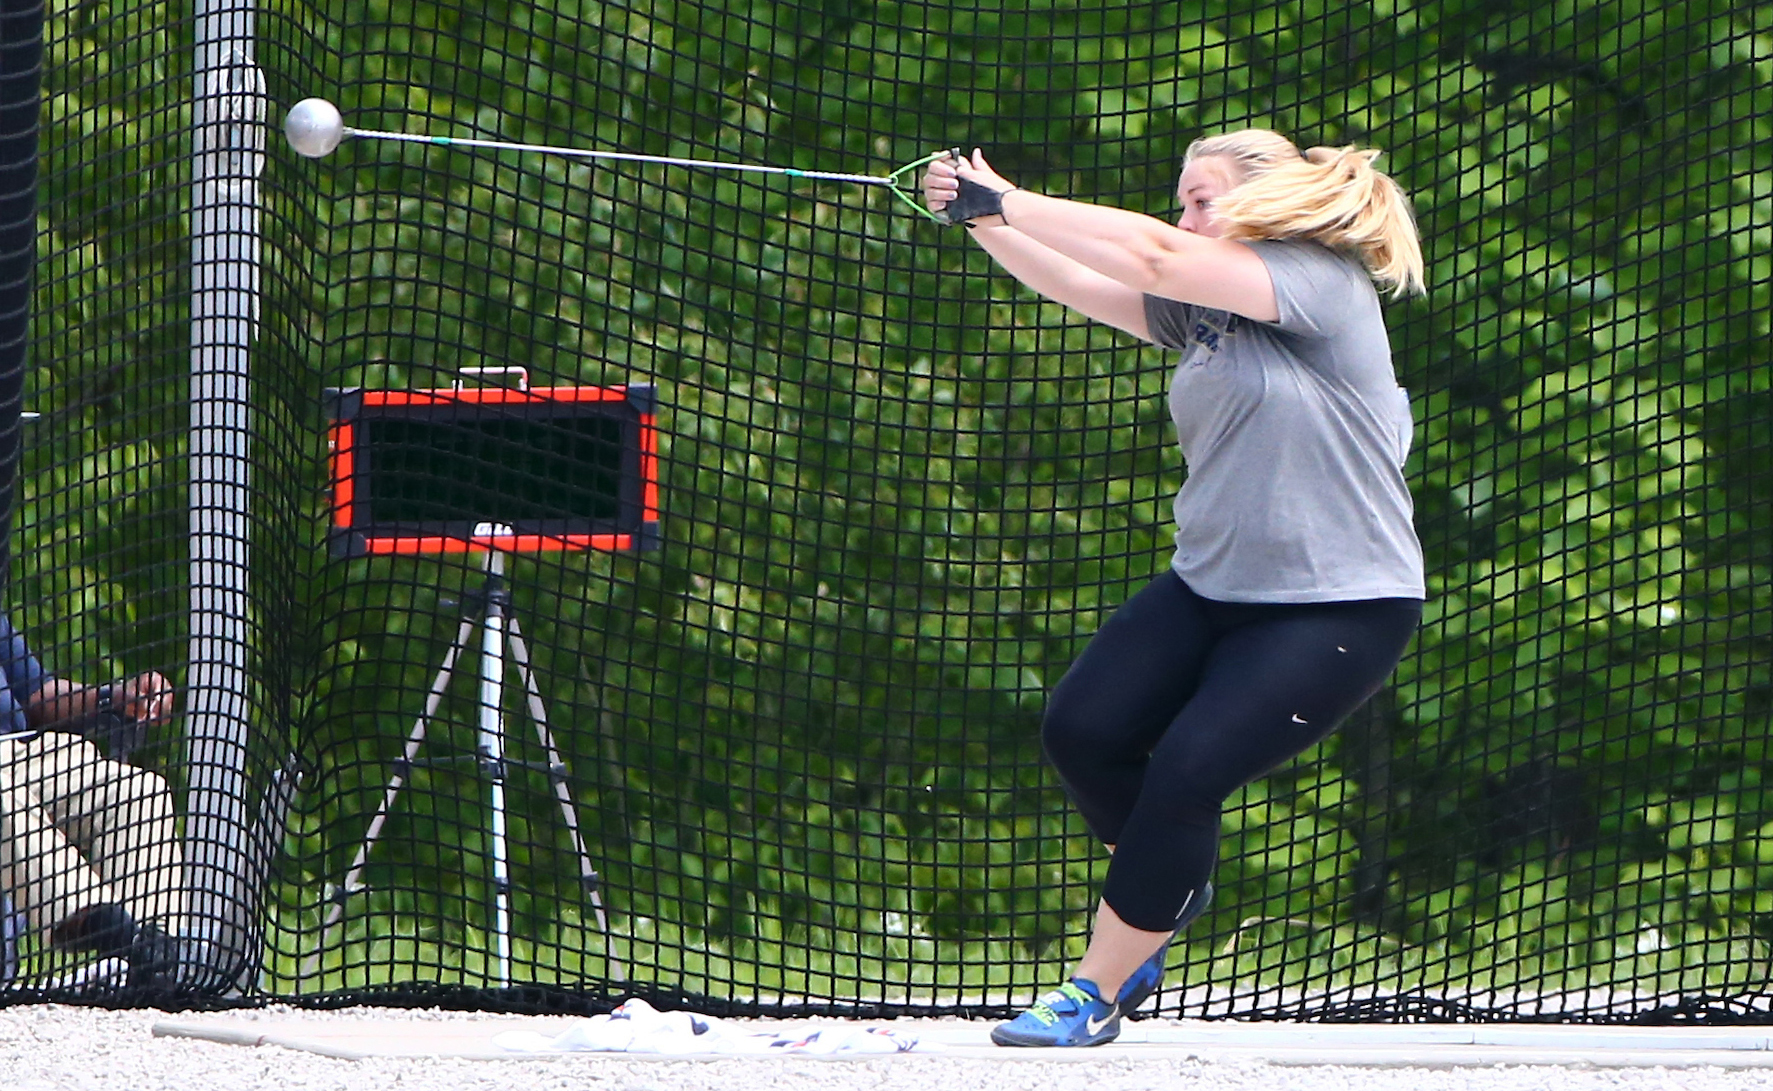 Eck Concludes Season with 18th-Place Finish in Hammer Throw